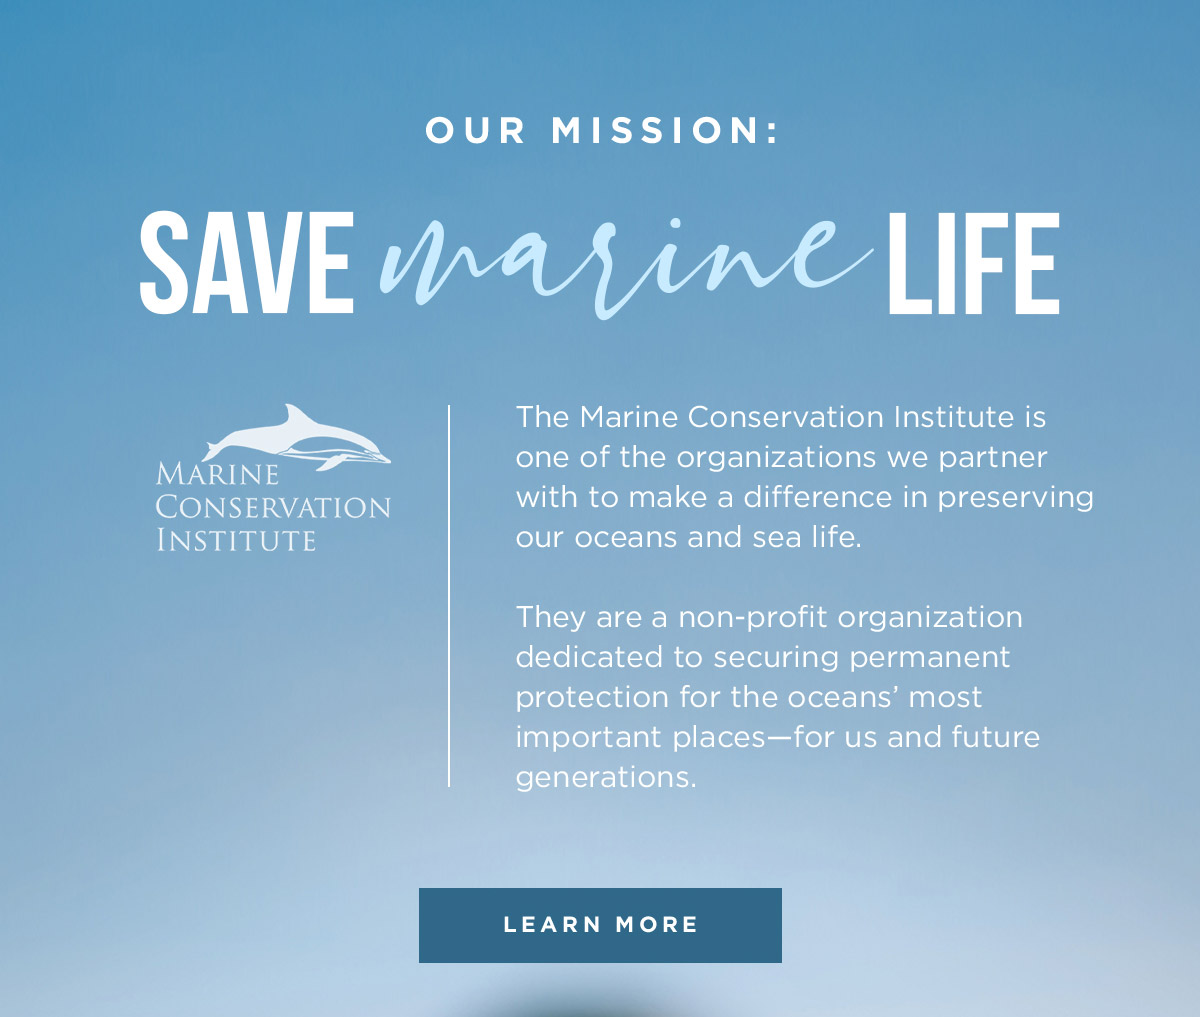 OUR MISSION: SAVE MARINE LIFE - The Marine Conservation Institue is one of the organizations we partner with to make a difference in preserving our oceans and sea life. LEARN MORE